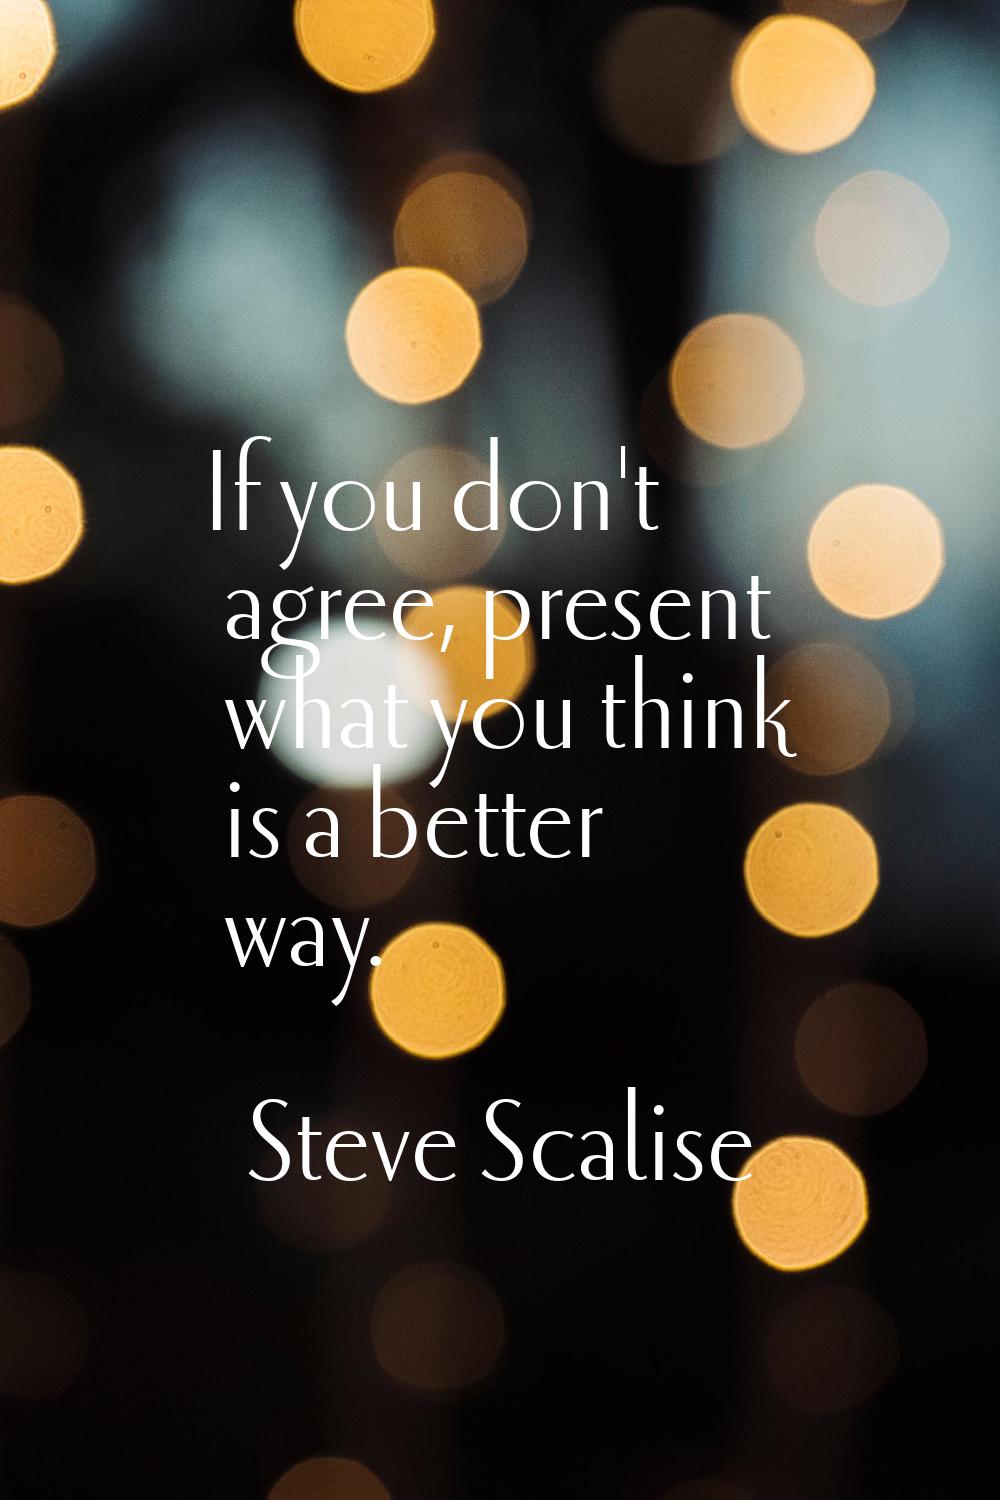 If you don't agree, present what you think is a better way.